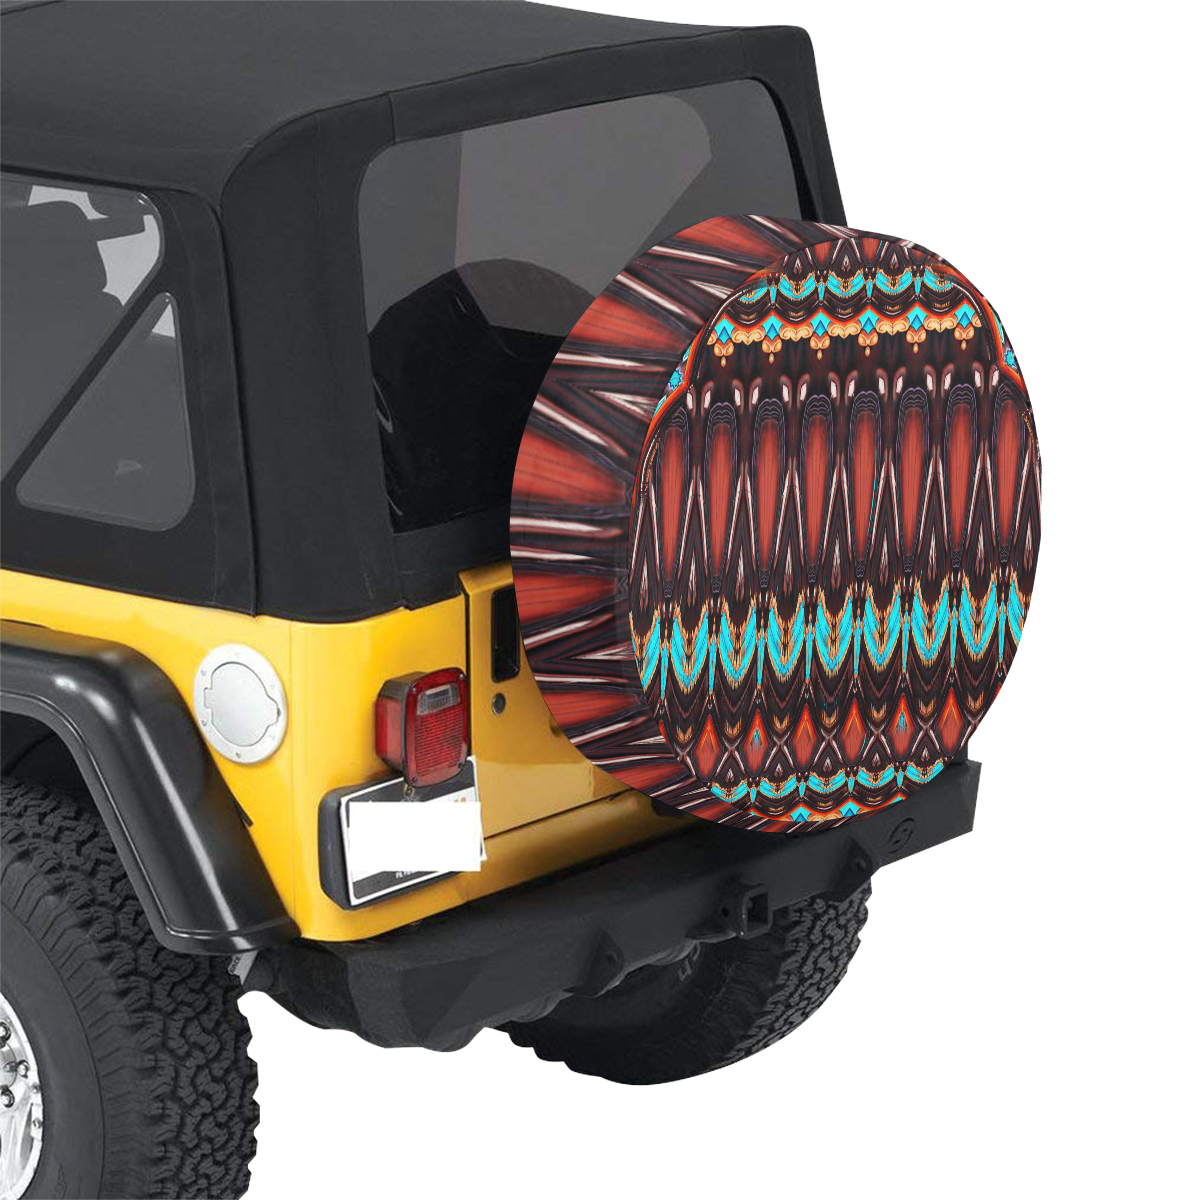 K172 Wood and Turquoise Abstract 30 Inch Spare Tire Cover